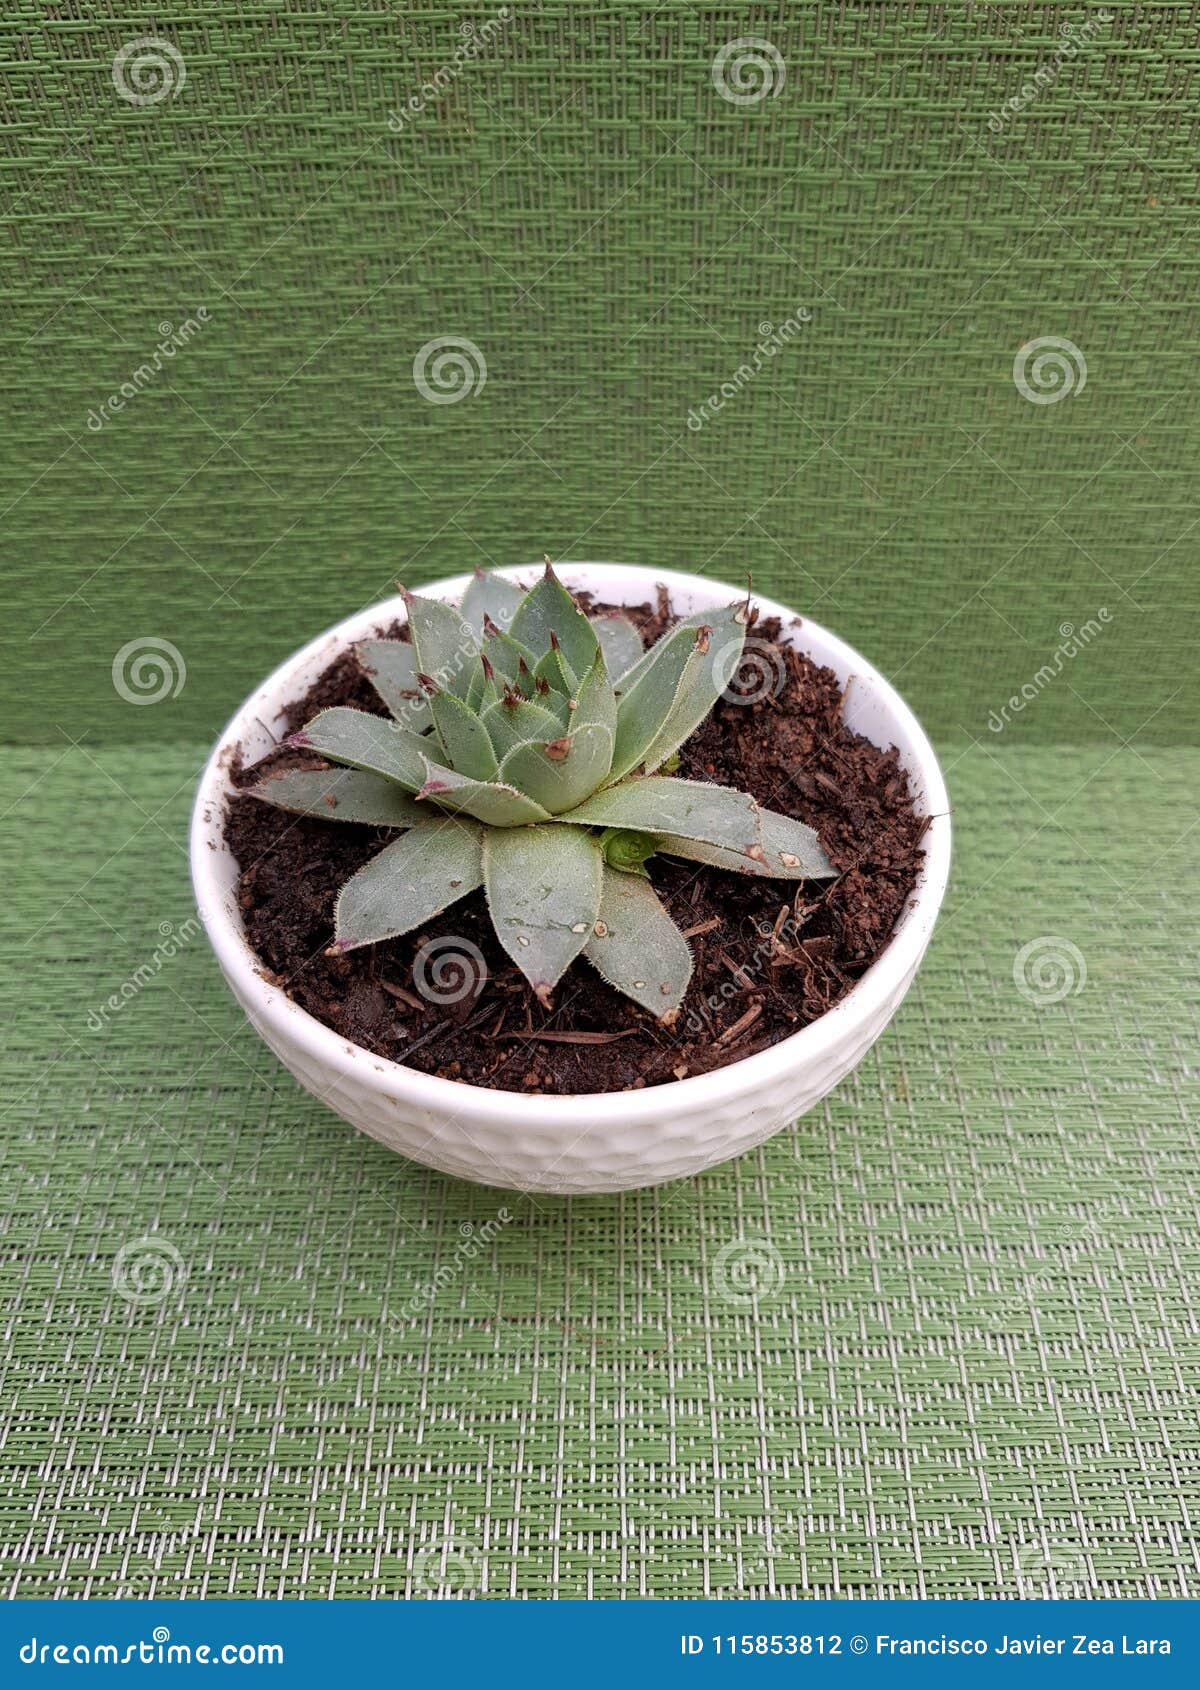 nail oficina miss cactus, in small white pot for decoration, with green background